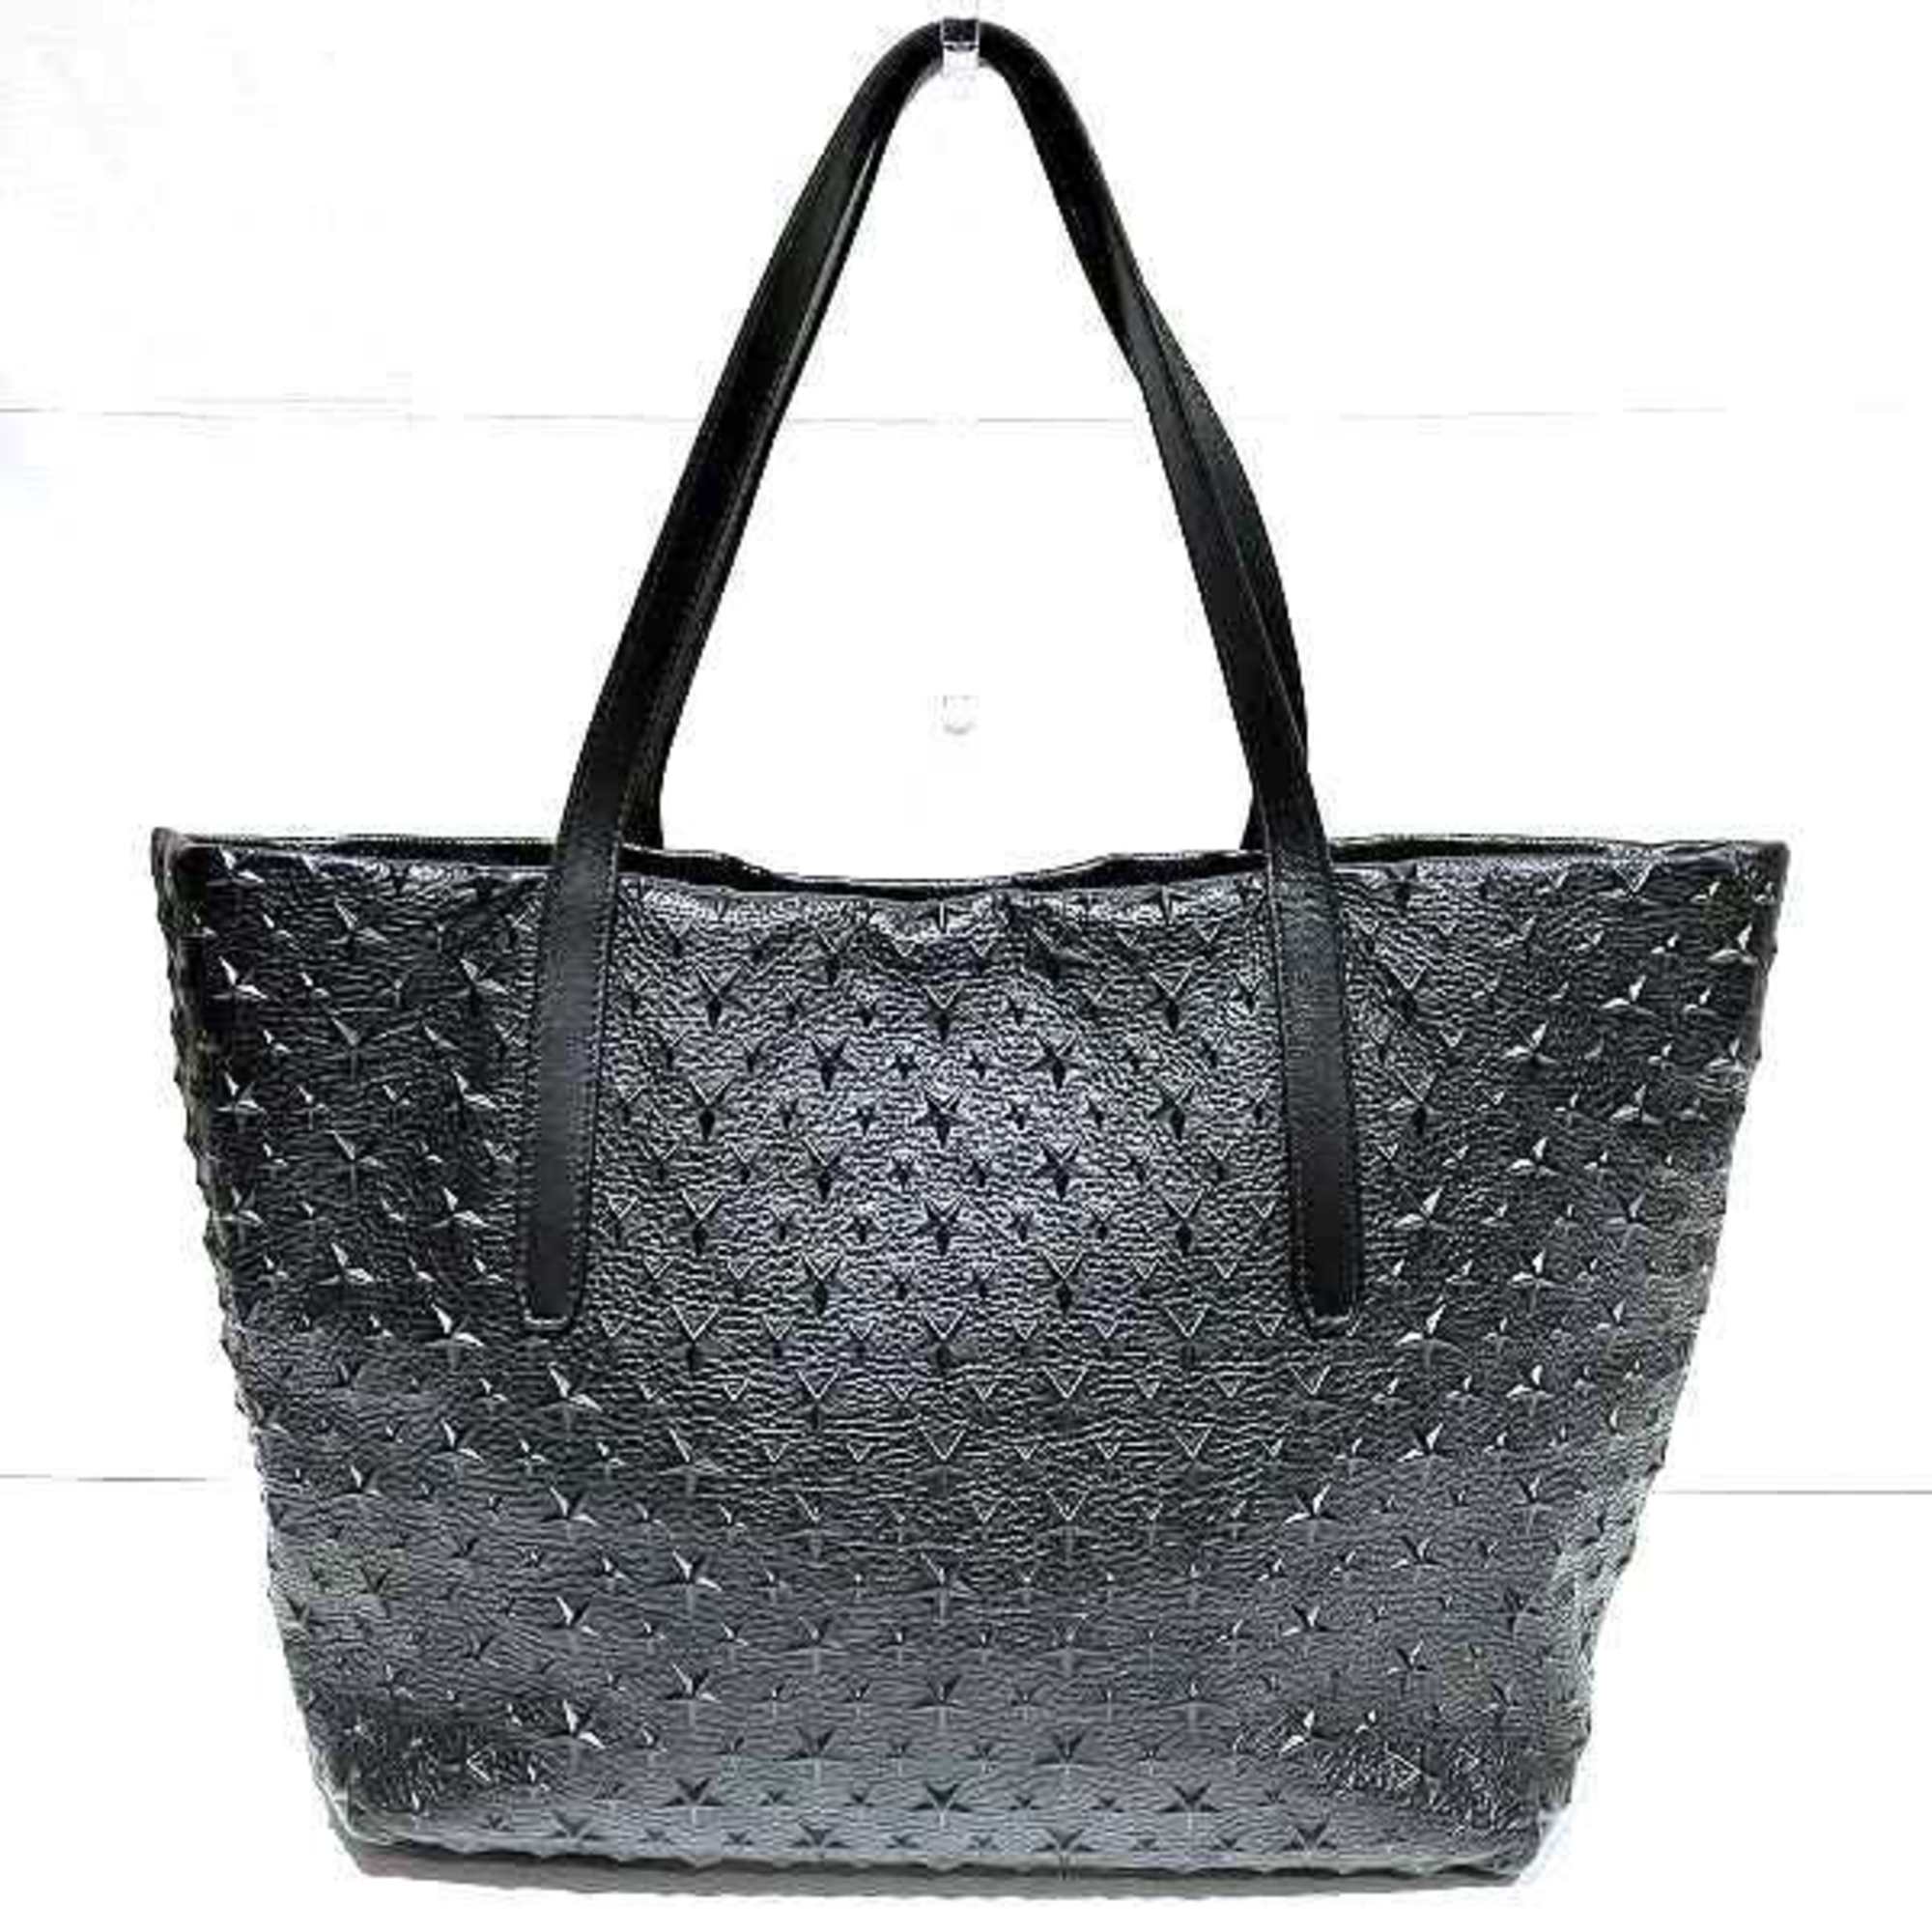 Jimmy Choo Studded Leather Bag Tote Women's